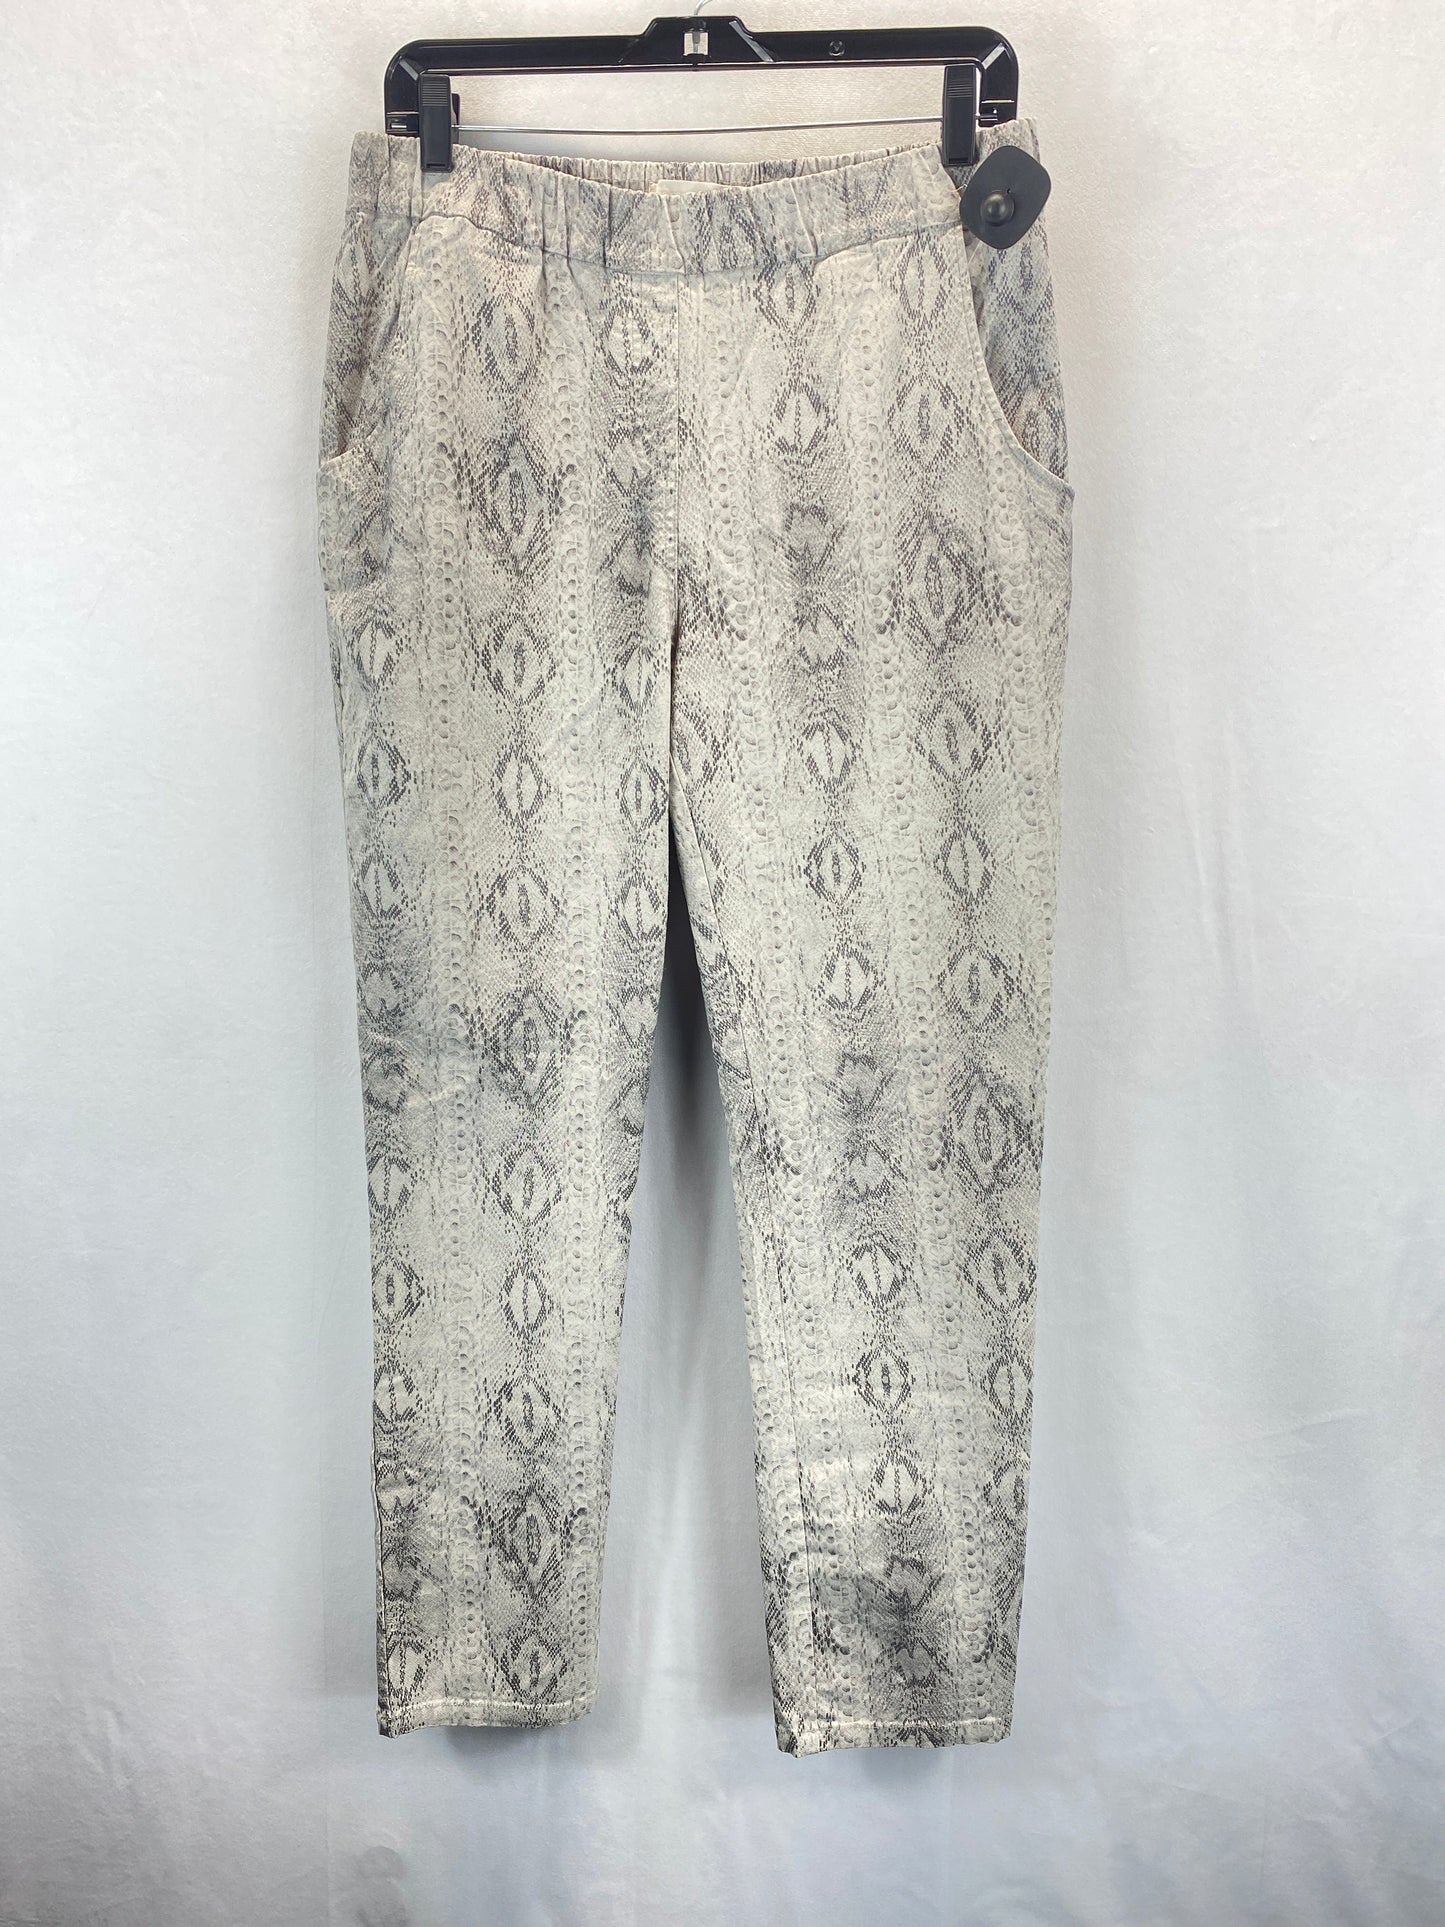 Snakeskin Print Pants Other Clothes Mentor, Size 1x